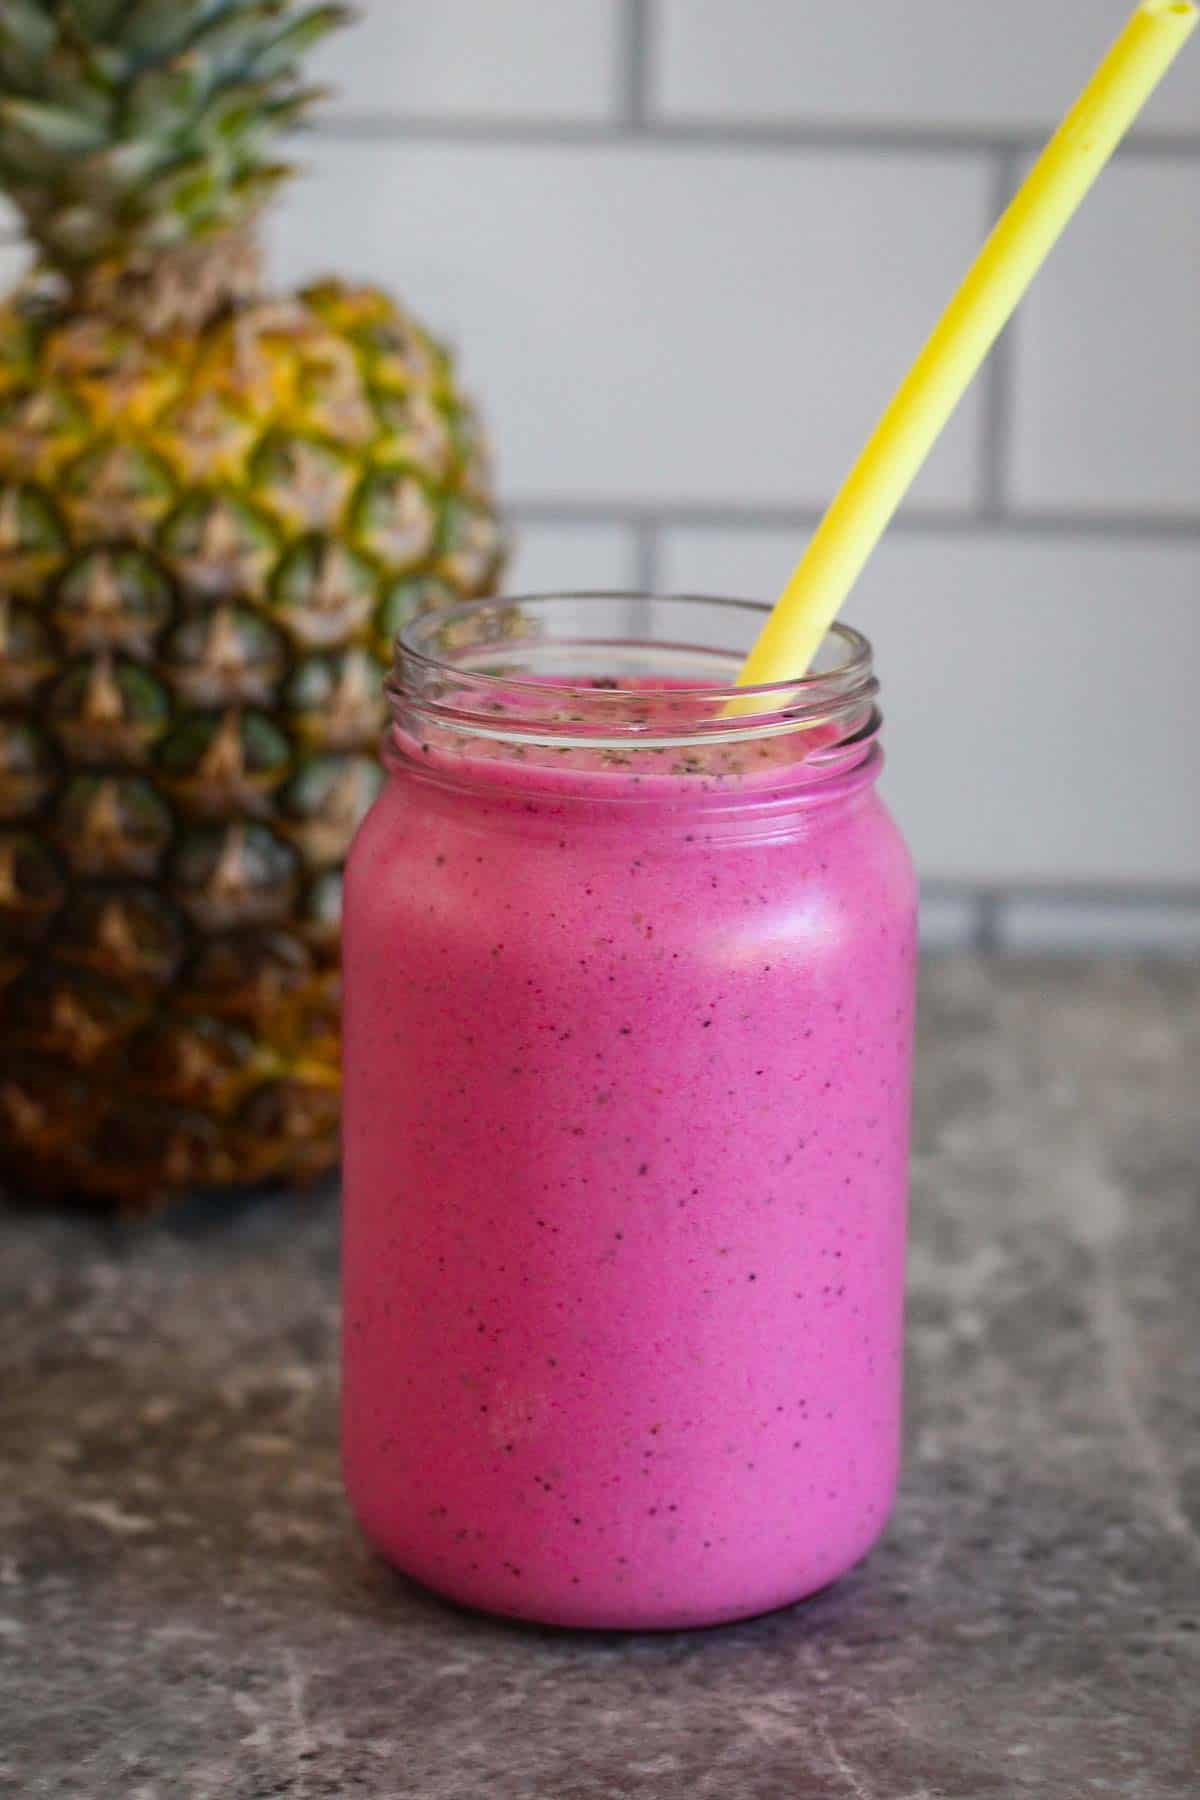 A jar of colorful smoothie, with a straw in it. There's a pineapple in the background while the jar is front and center.